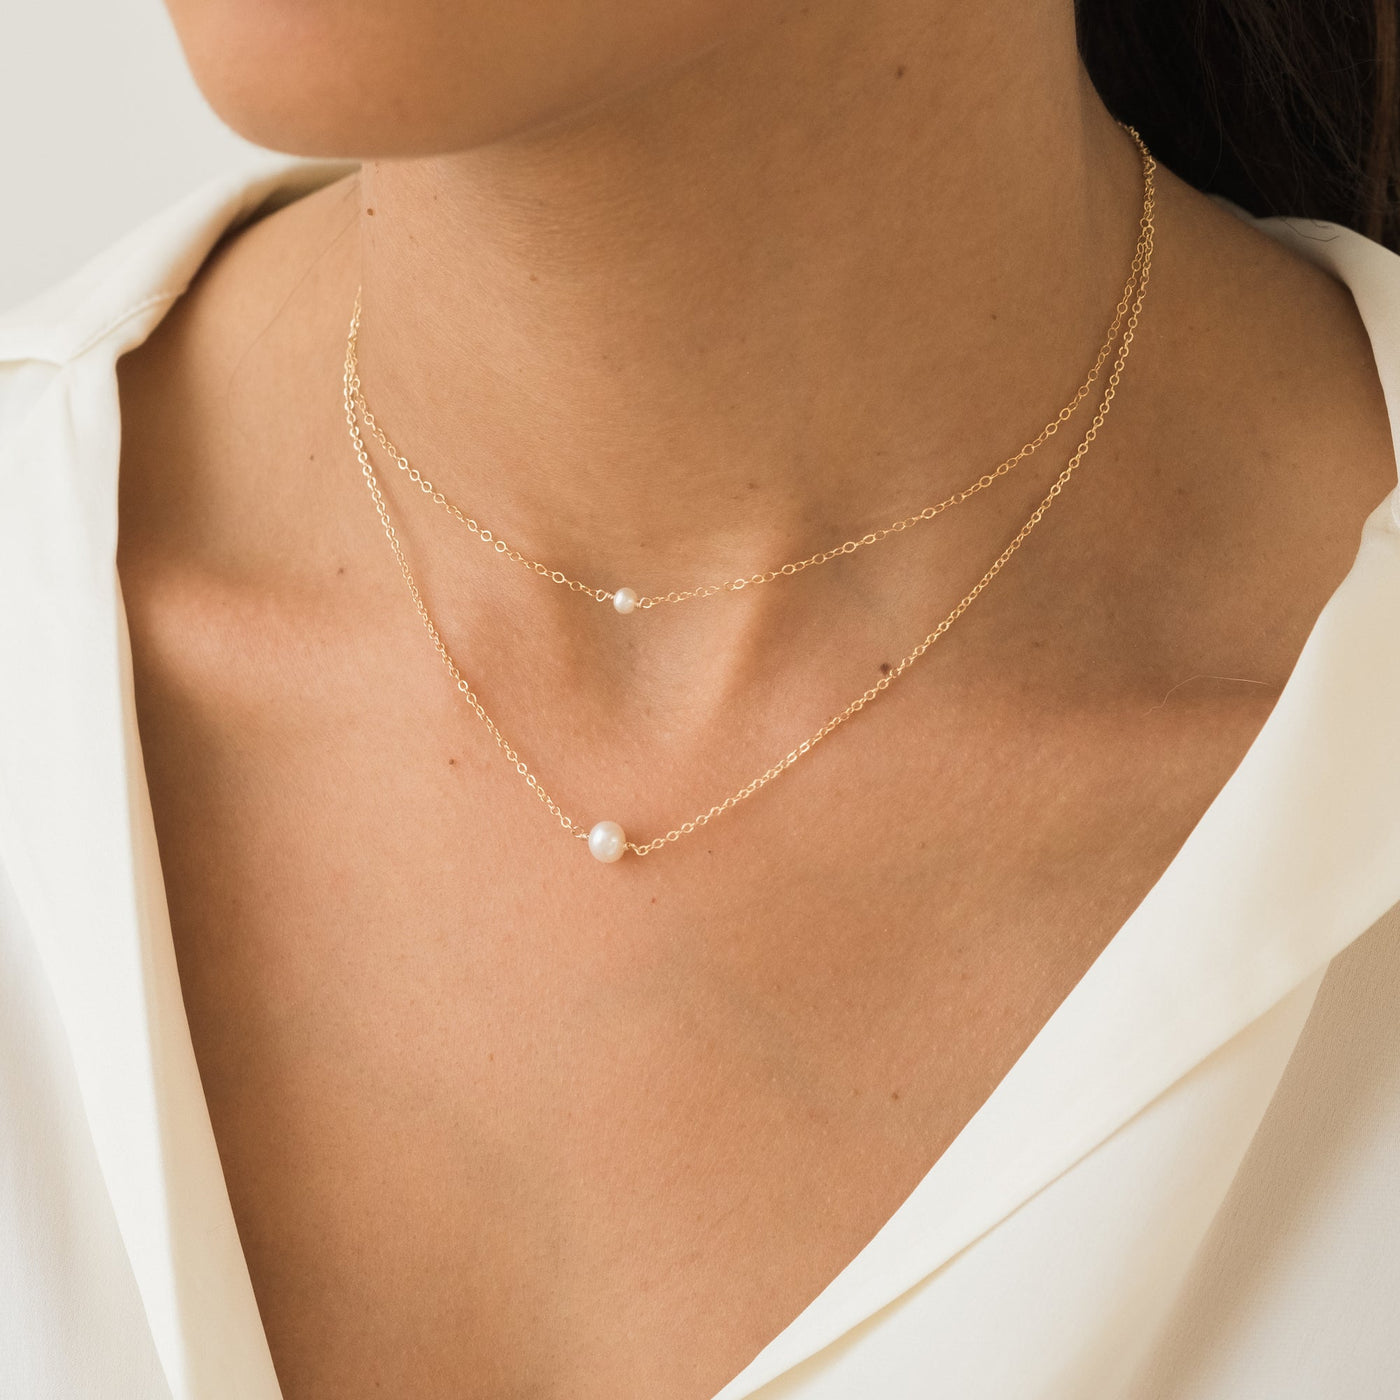 Buy Half Pearl Half Gold Choker Necklace, Trendy 14K Gold Link Chain and  Pearl Choker, Dainty Pearl Necklace, Minimalist Two Chains Necklace Online  in India - Etsy